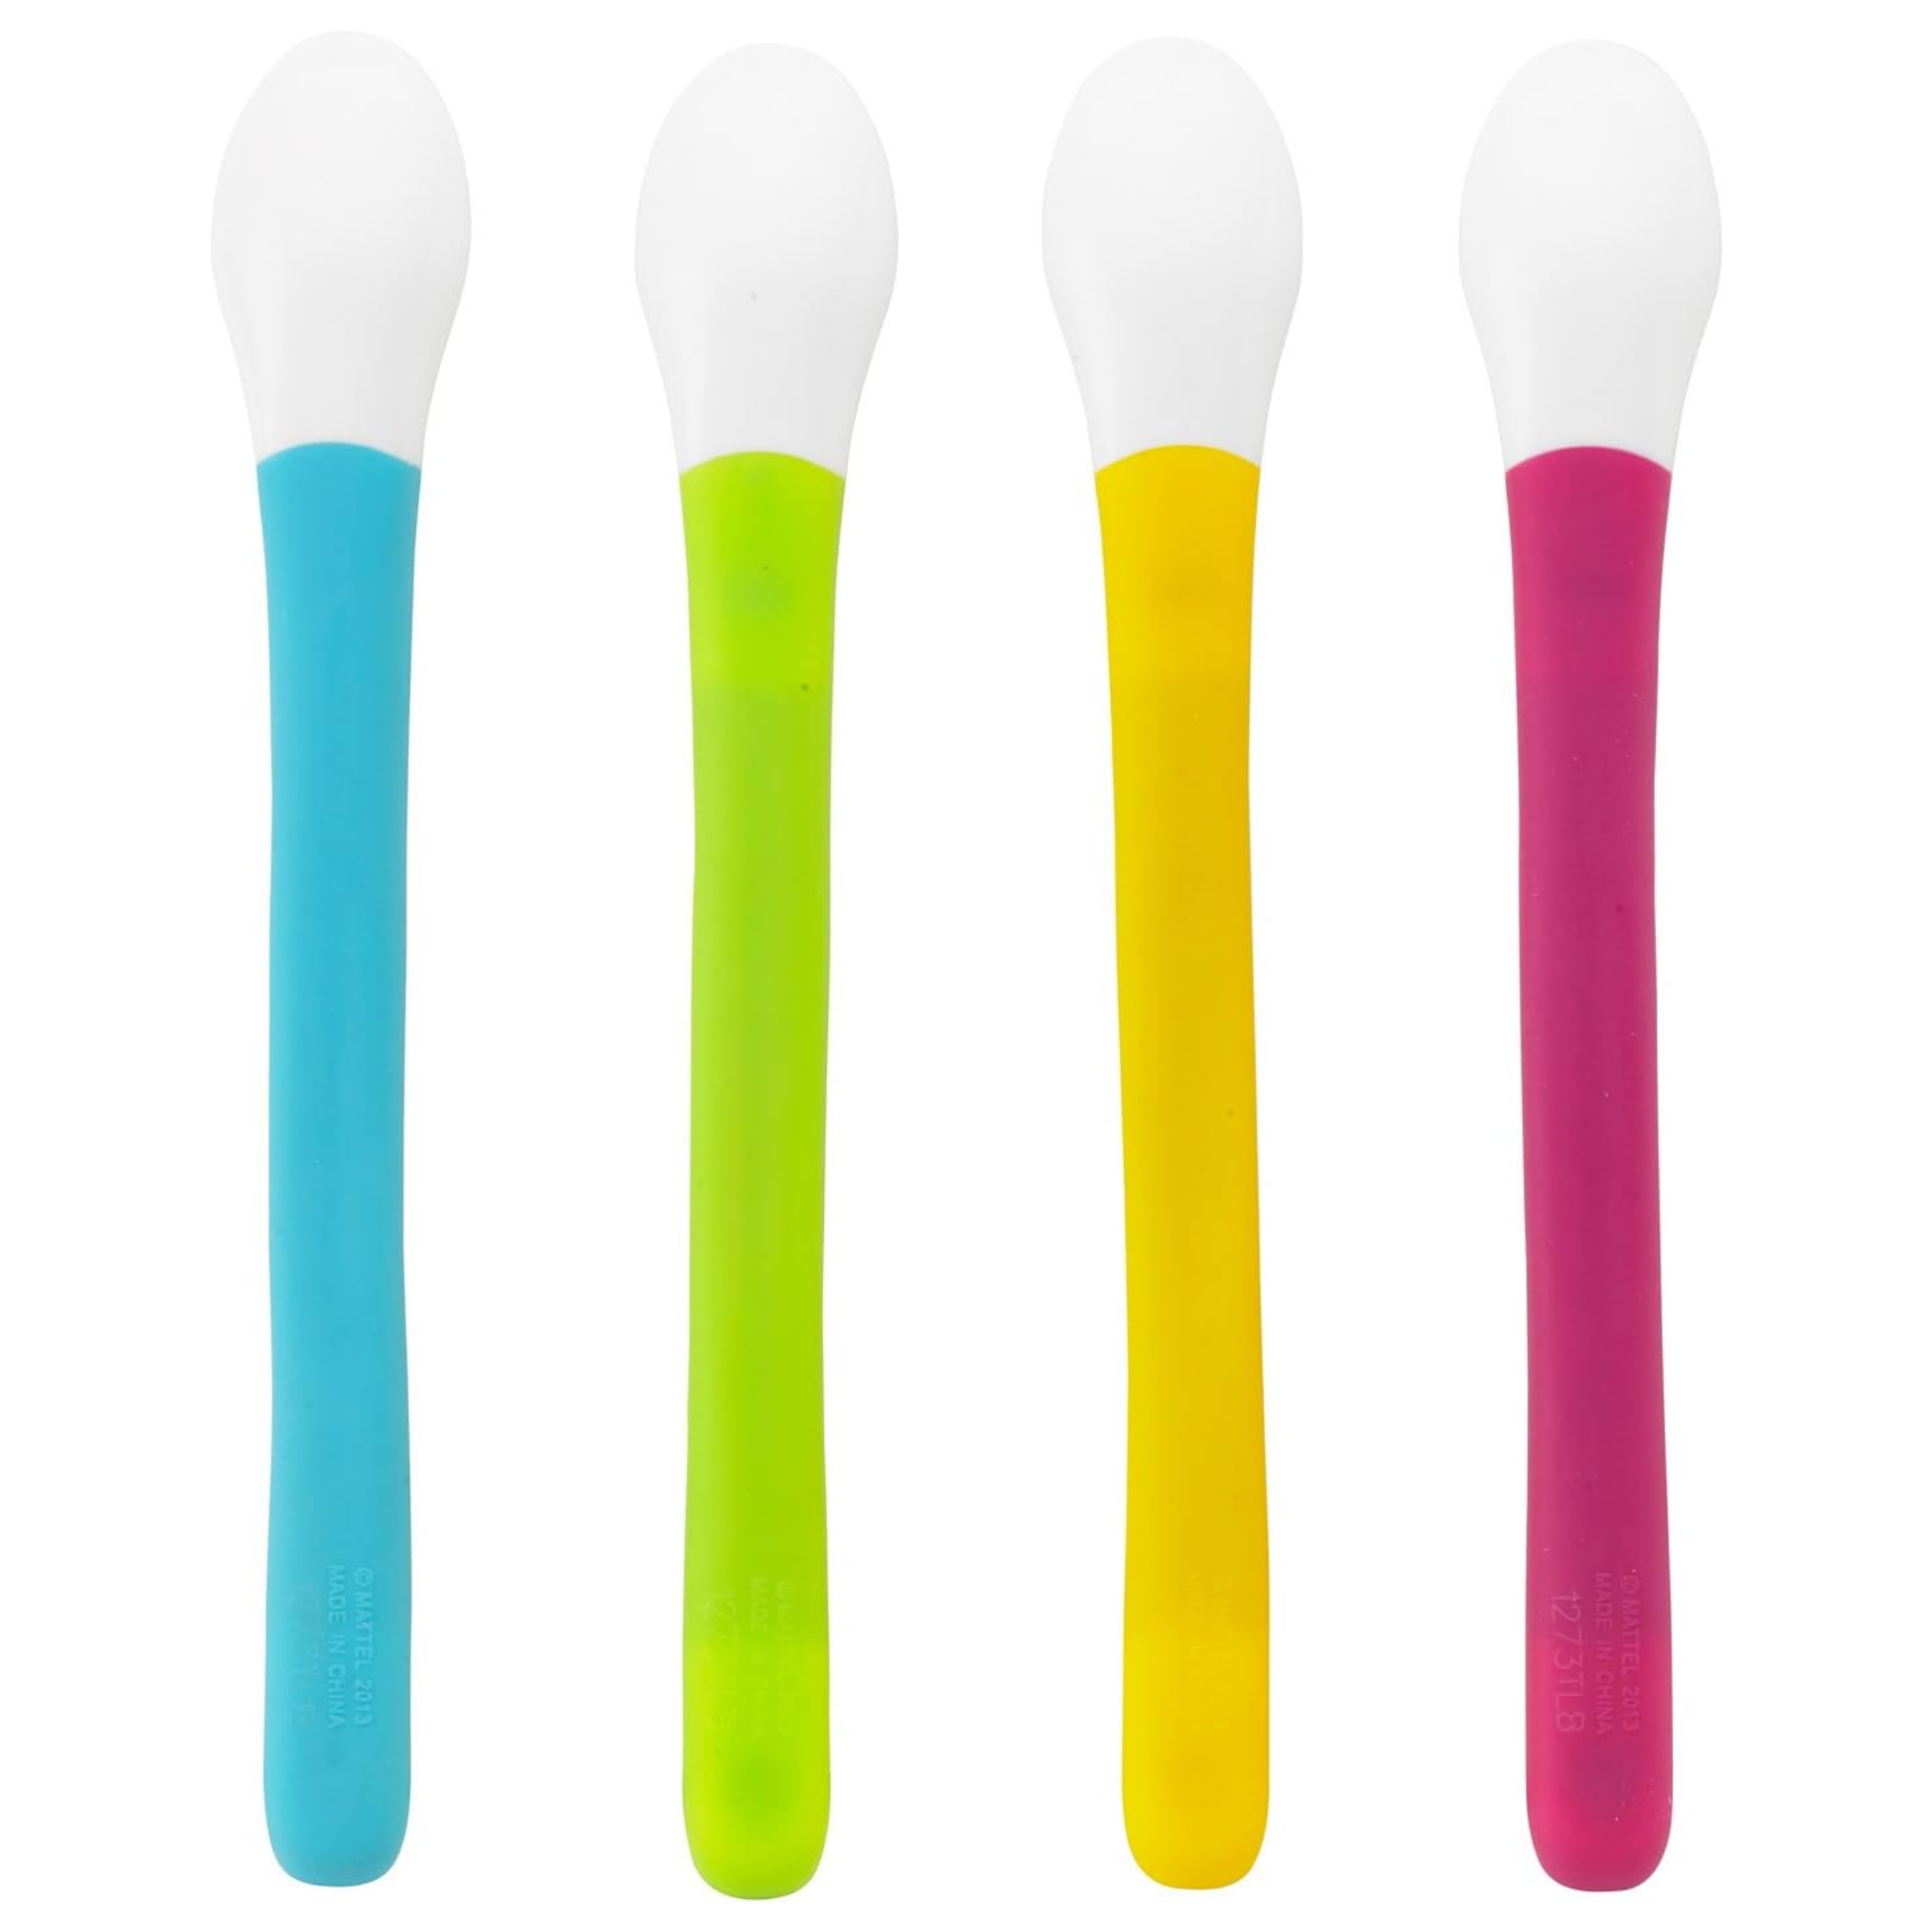 Fisher Price Learn-to-hold Spoons (4 Pack)